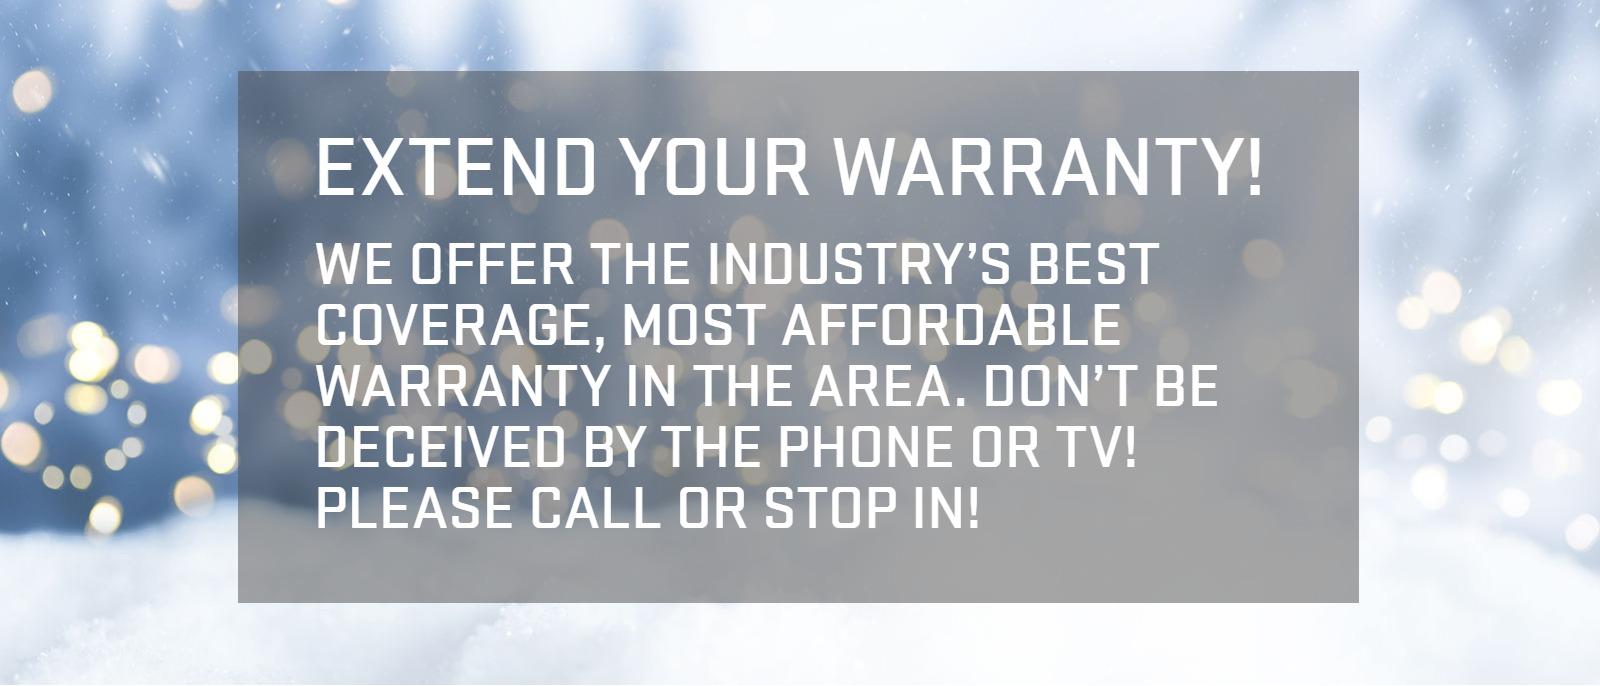 Extend Your Warranty!
We offer the industry’s best coverage, most affordable warranty in the area. Don’t be deceived by the phone or TV! Please call or stop in!